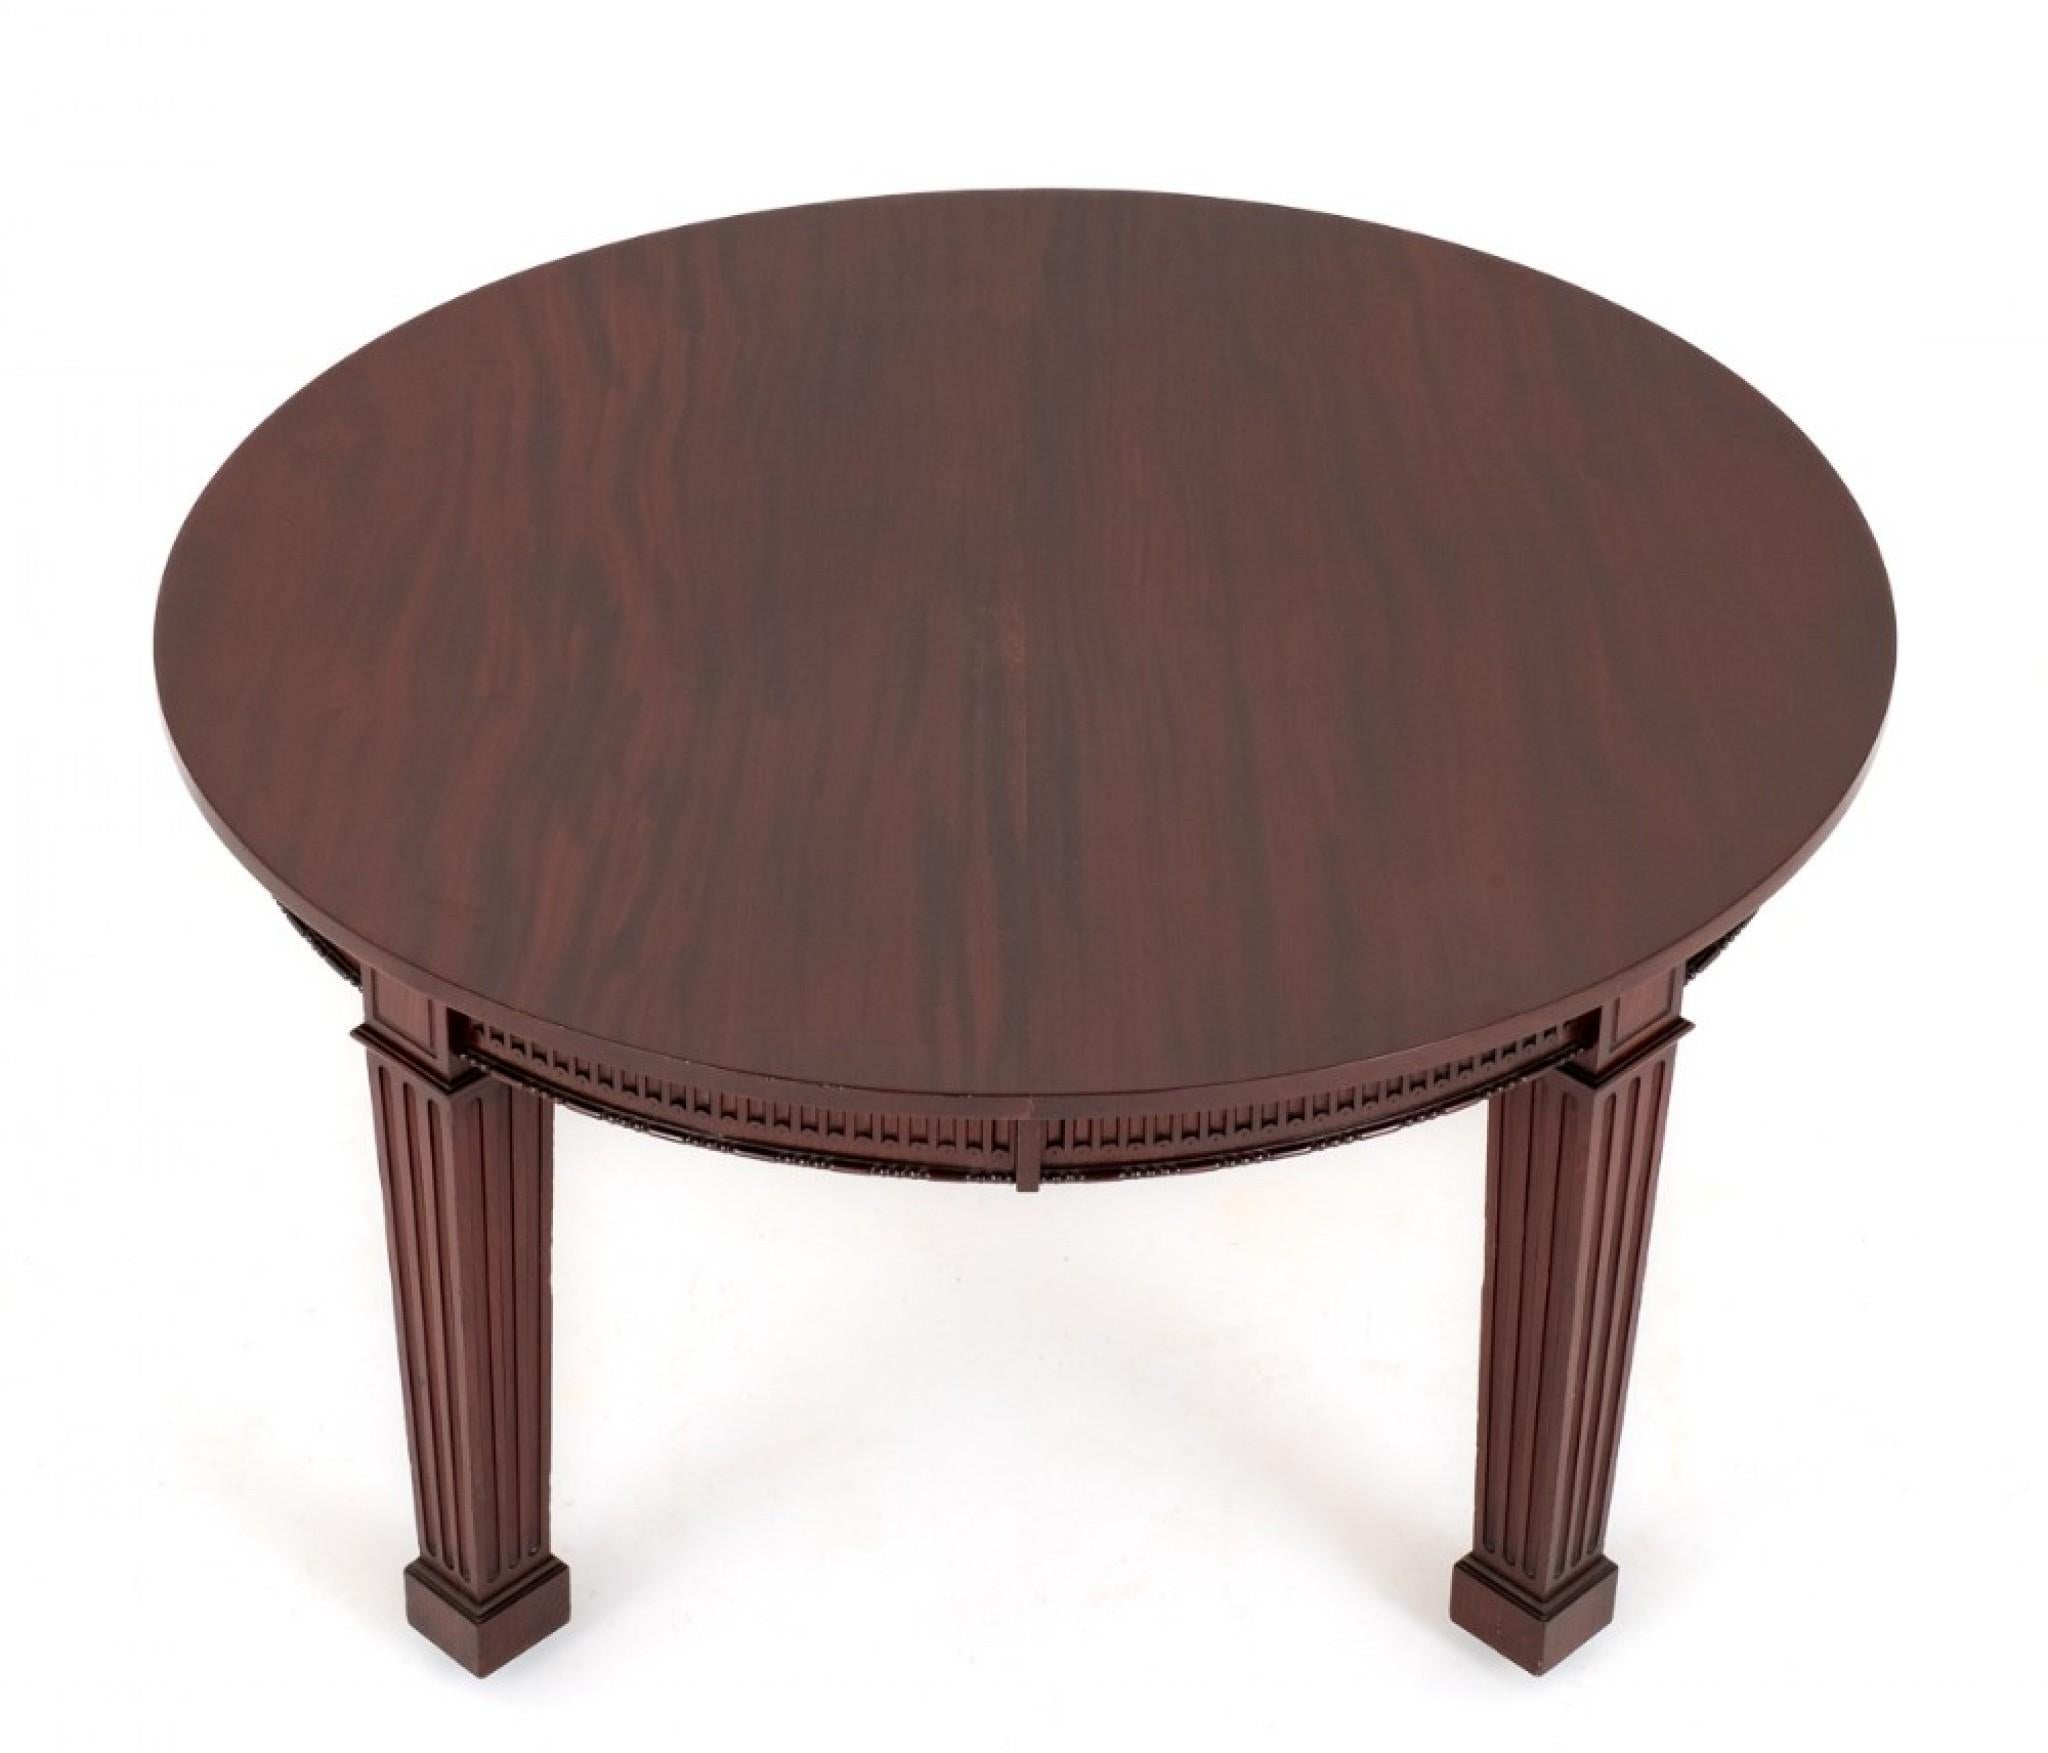 Period Victorian Dining Table Extending Mahogany 2 Leaf 3